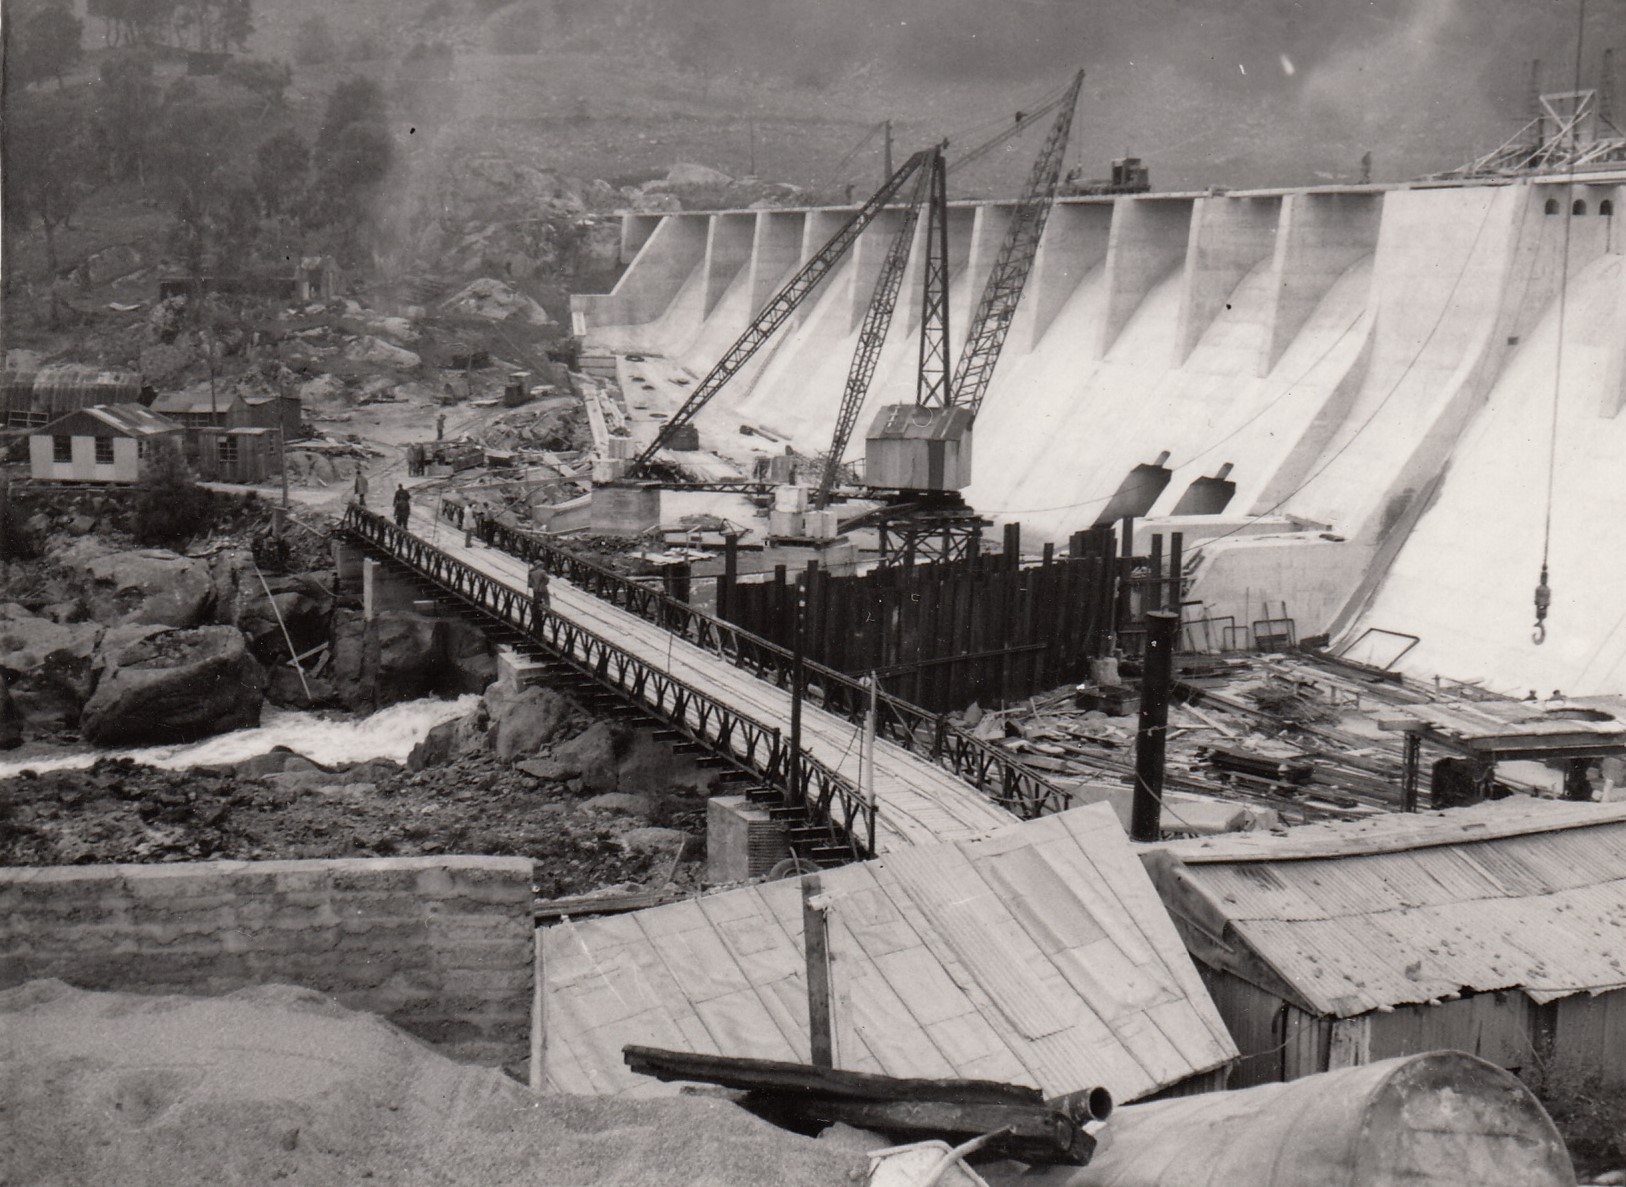 A black and white photo that is historical depicting the building of a hydro electric dam with cranes and exacvations shown 